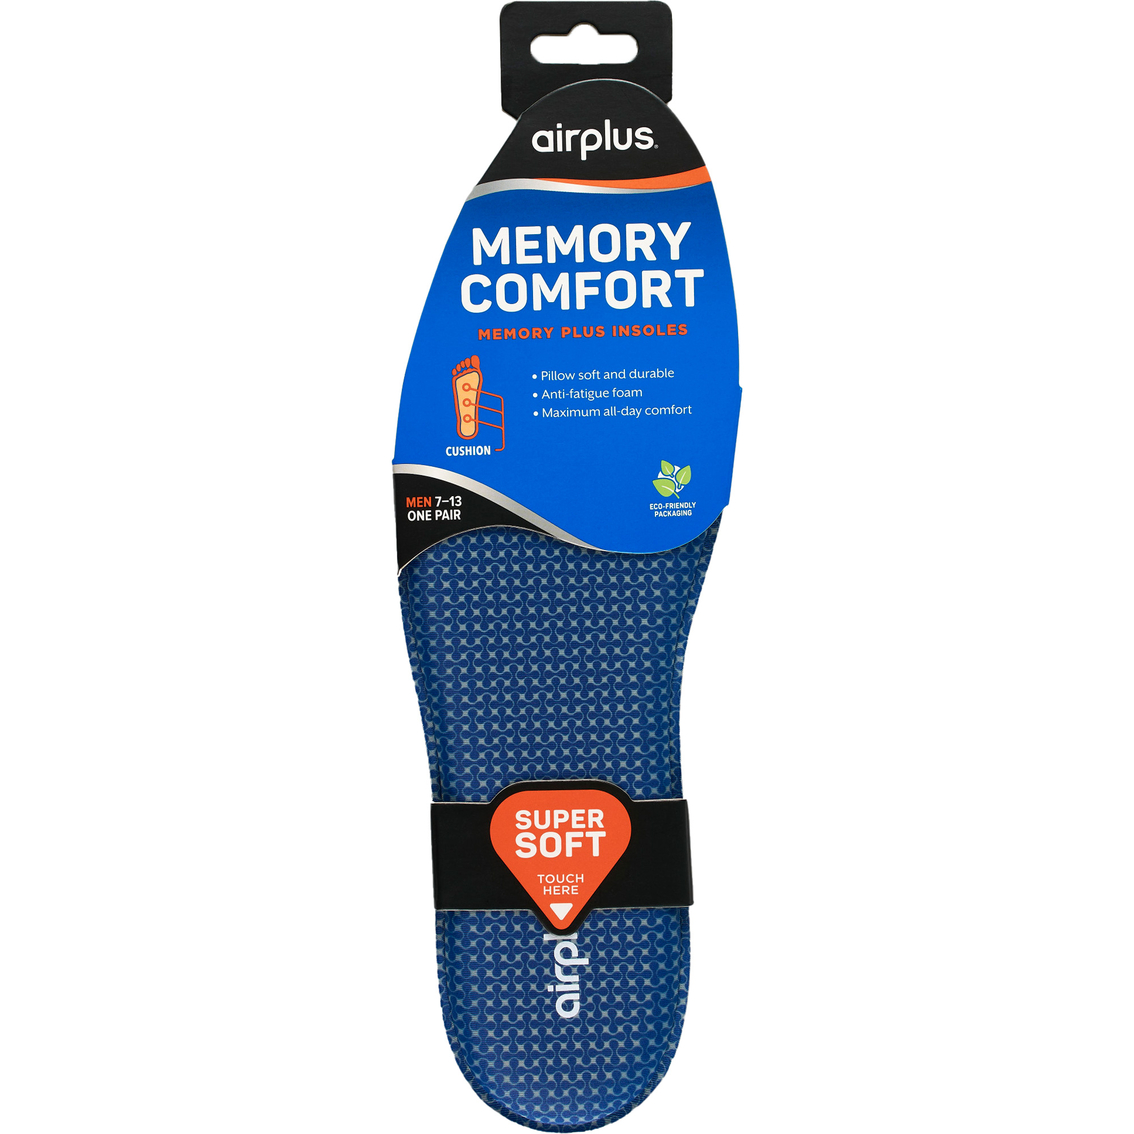 Airplus Memory Comfort Shoe Insoles for Pressure Relief, Size 7 to 13 - Image 4 of 5